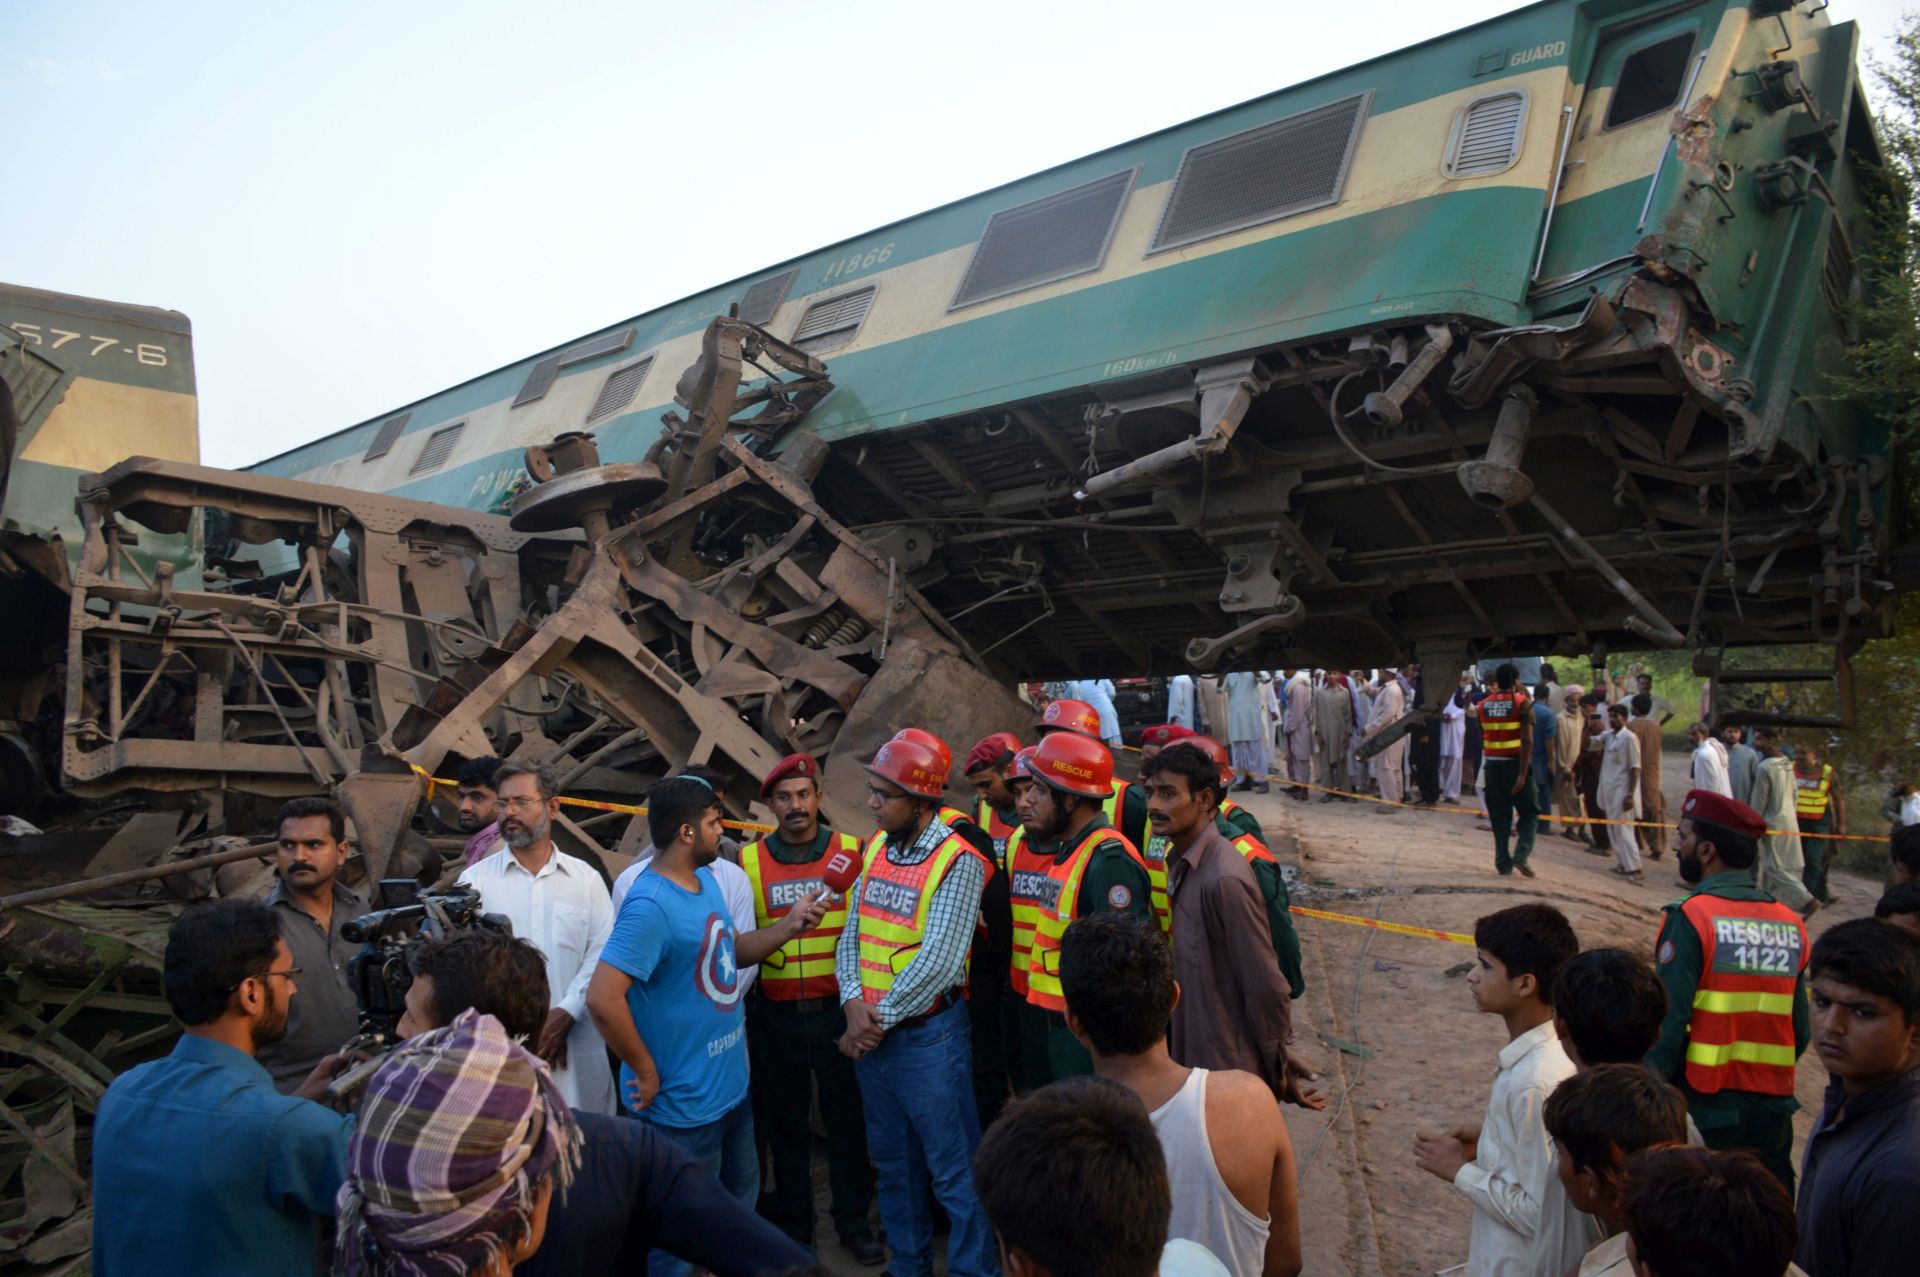 epa05540234 Rescue workers and people gather at the scene of a train accident near Buch station, close to Multan, Pakistan, 15 September 2016. A goods train collided with a Awam express passenger train near Multan, killing at least six passengers, according to authorities.  EPA/FAISAL KAREEM